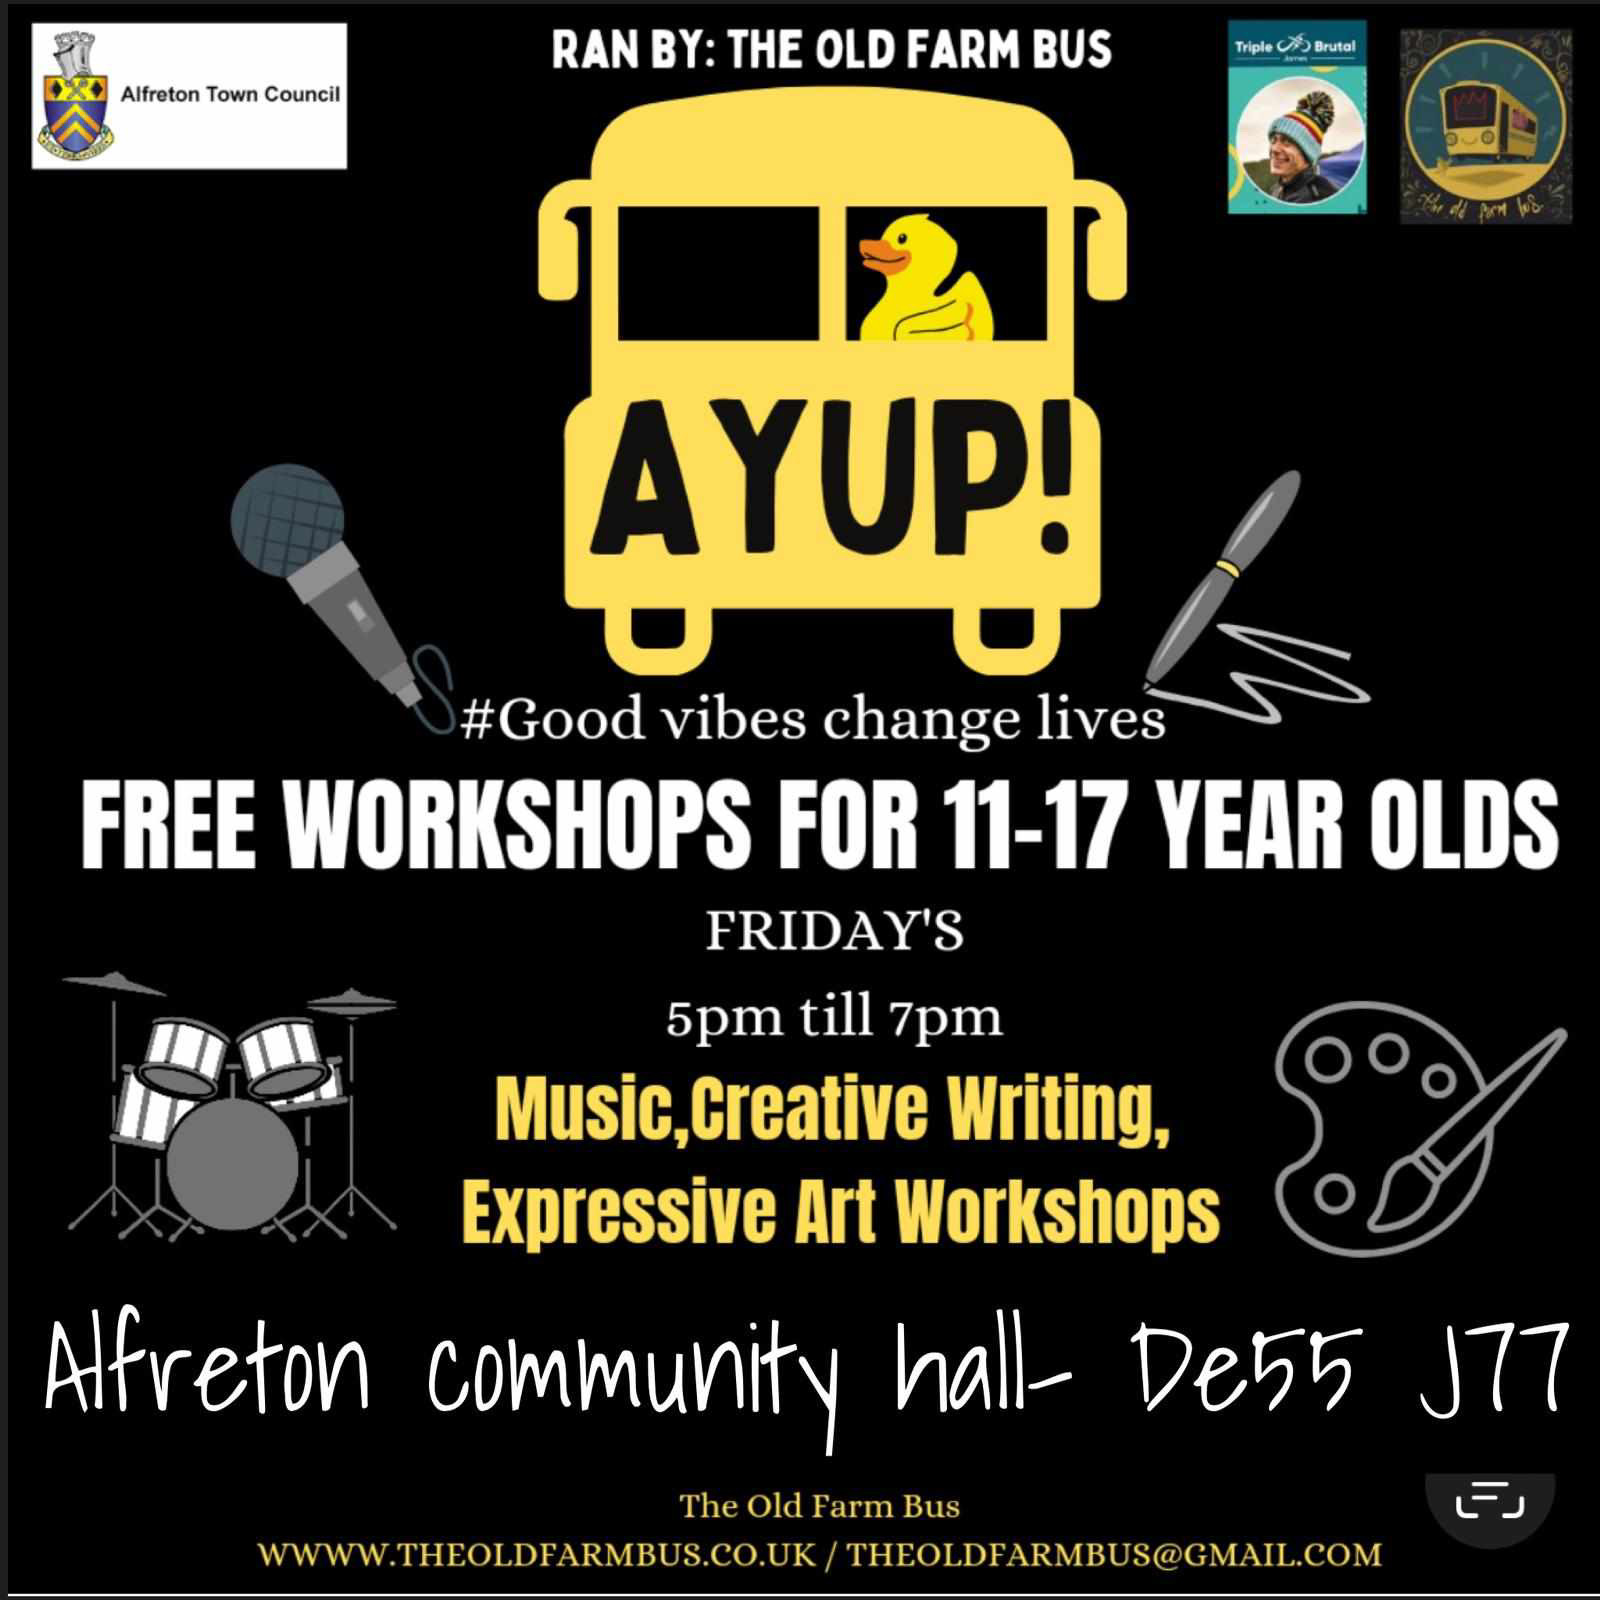 AYUP - Free workshops for 11-17 year olds